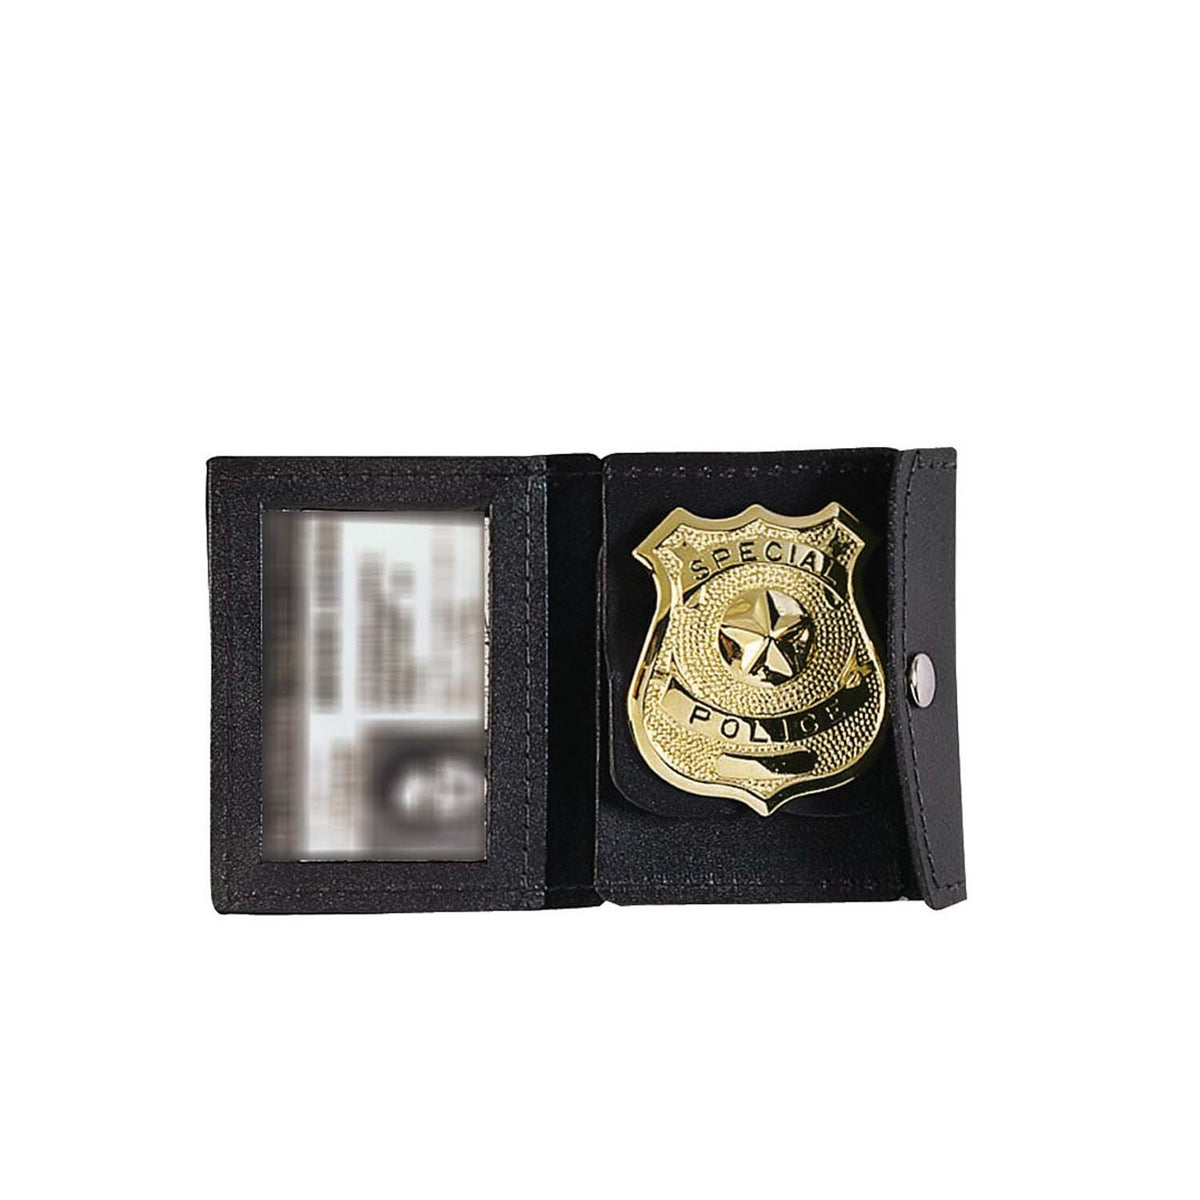 Rothco Leather ID Badge Holder